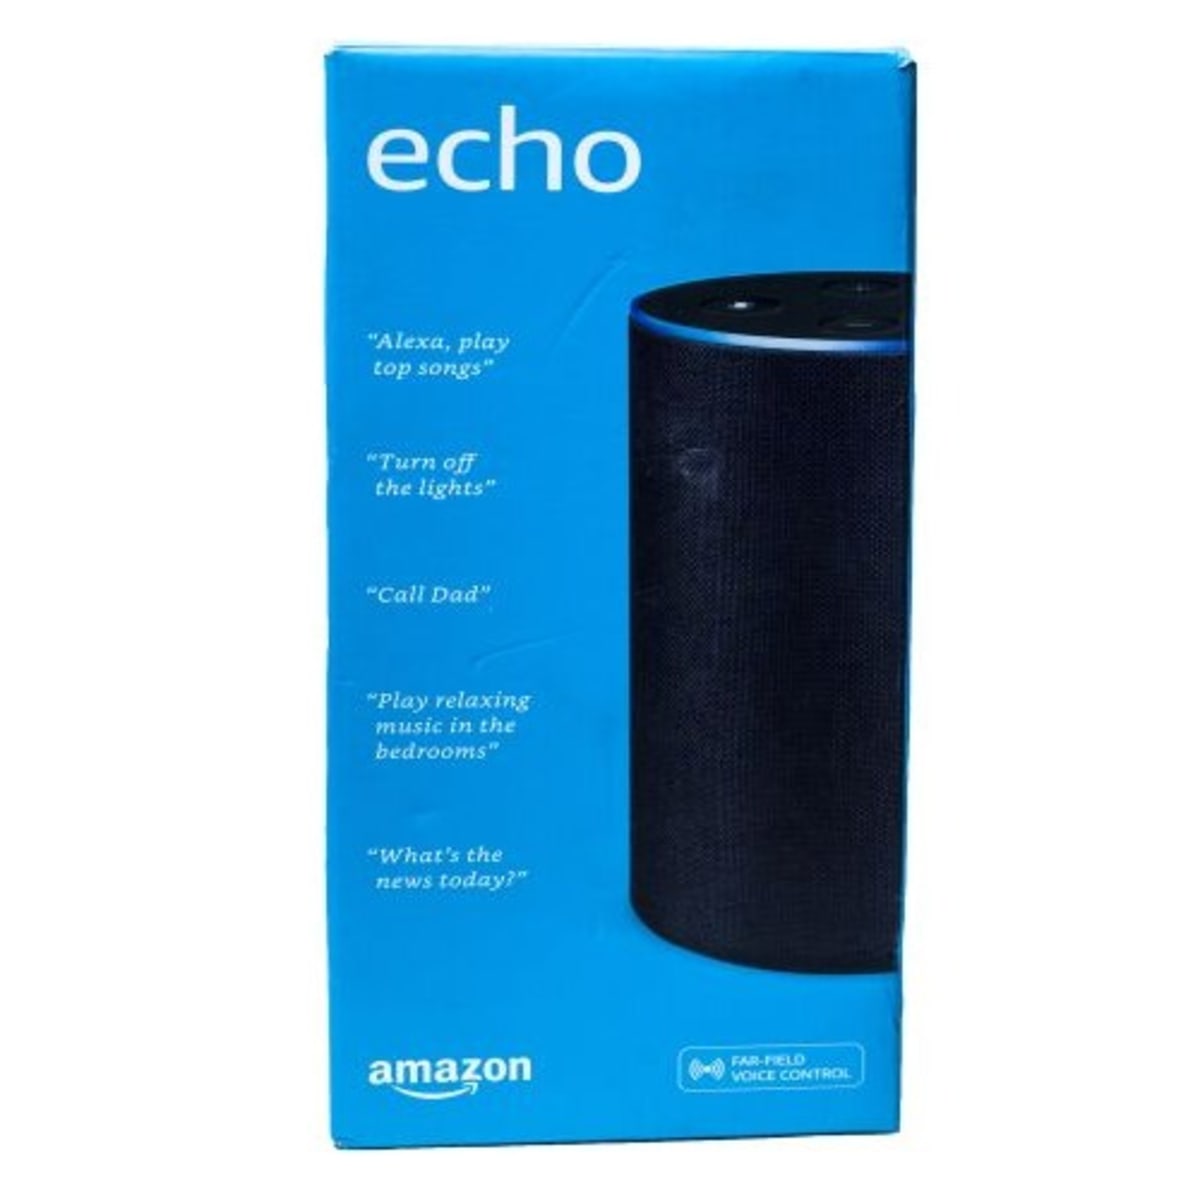 NEW  Echo 2nd Gen Smart Speaker Alexa and Dolby processing Charcoal  Fabric